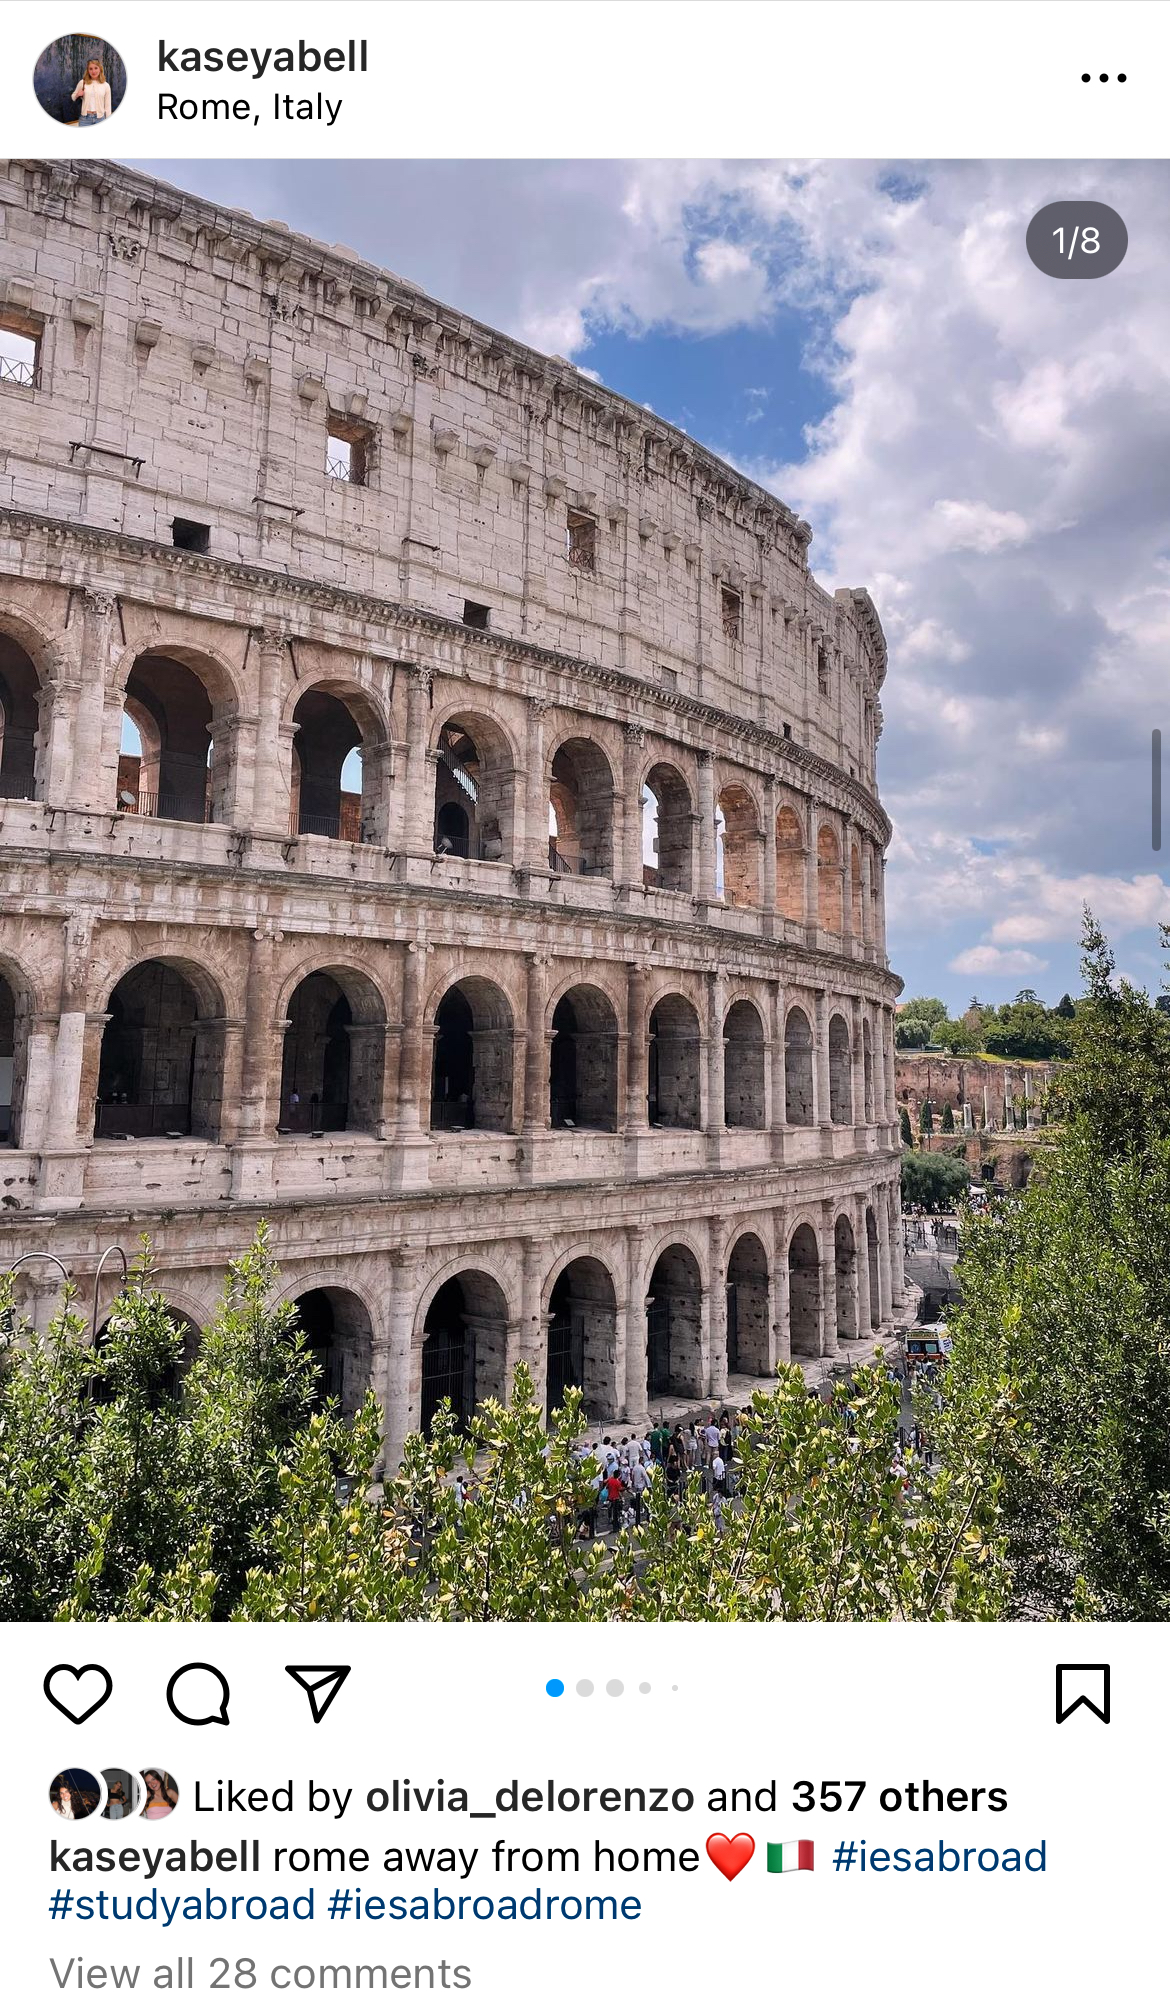 This instagram post depicts a side angle of the world famous colloseum in Rome Italy